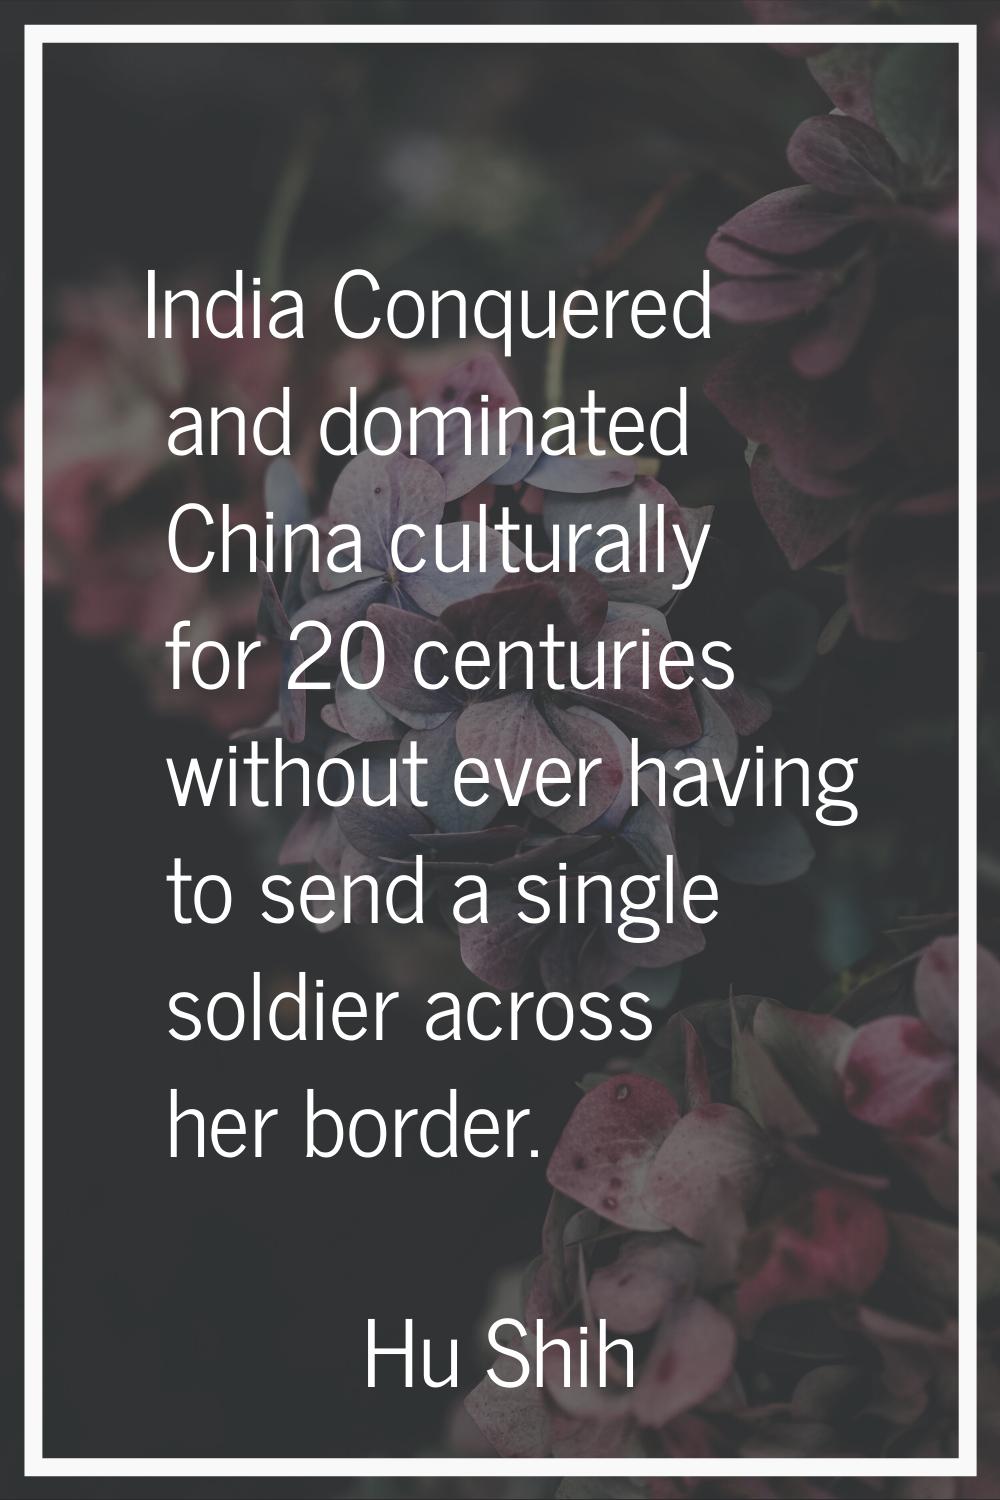 India Conquered and dominated China culturally for 20 centuries without ever having to send a singl